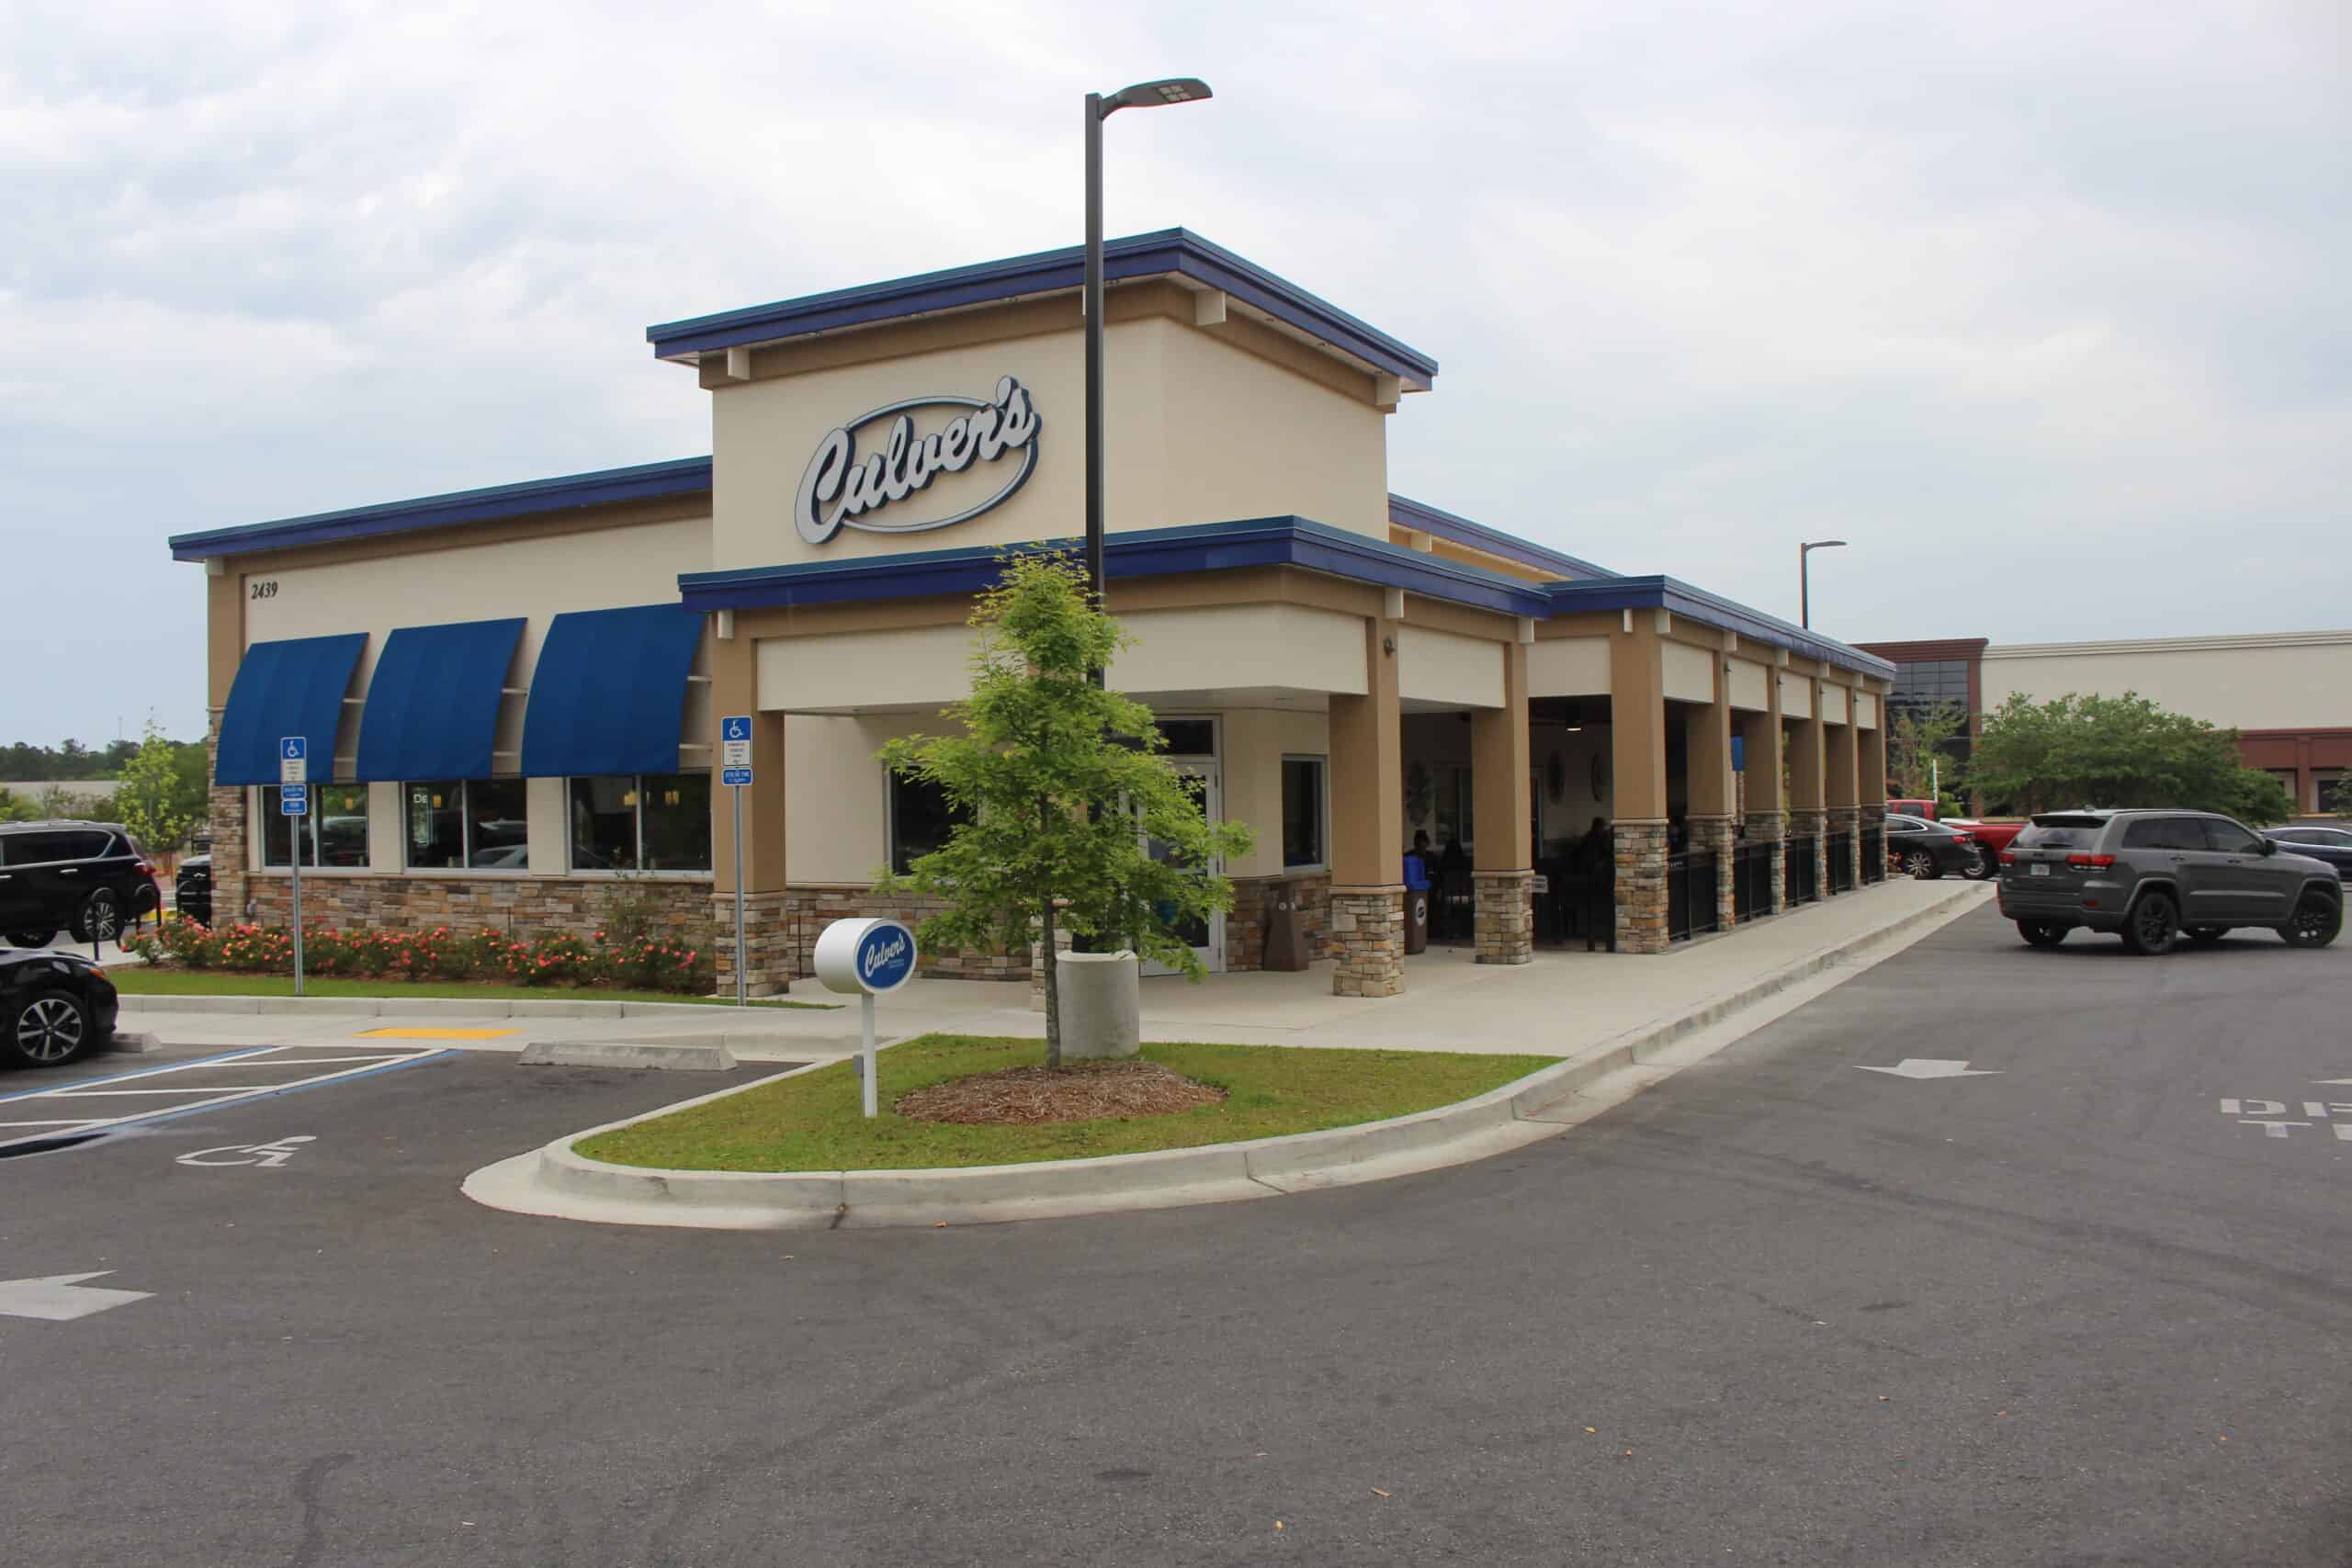 Culver's in Tallahassee, Florida